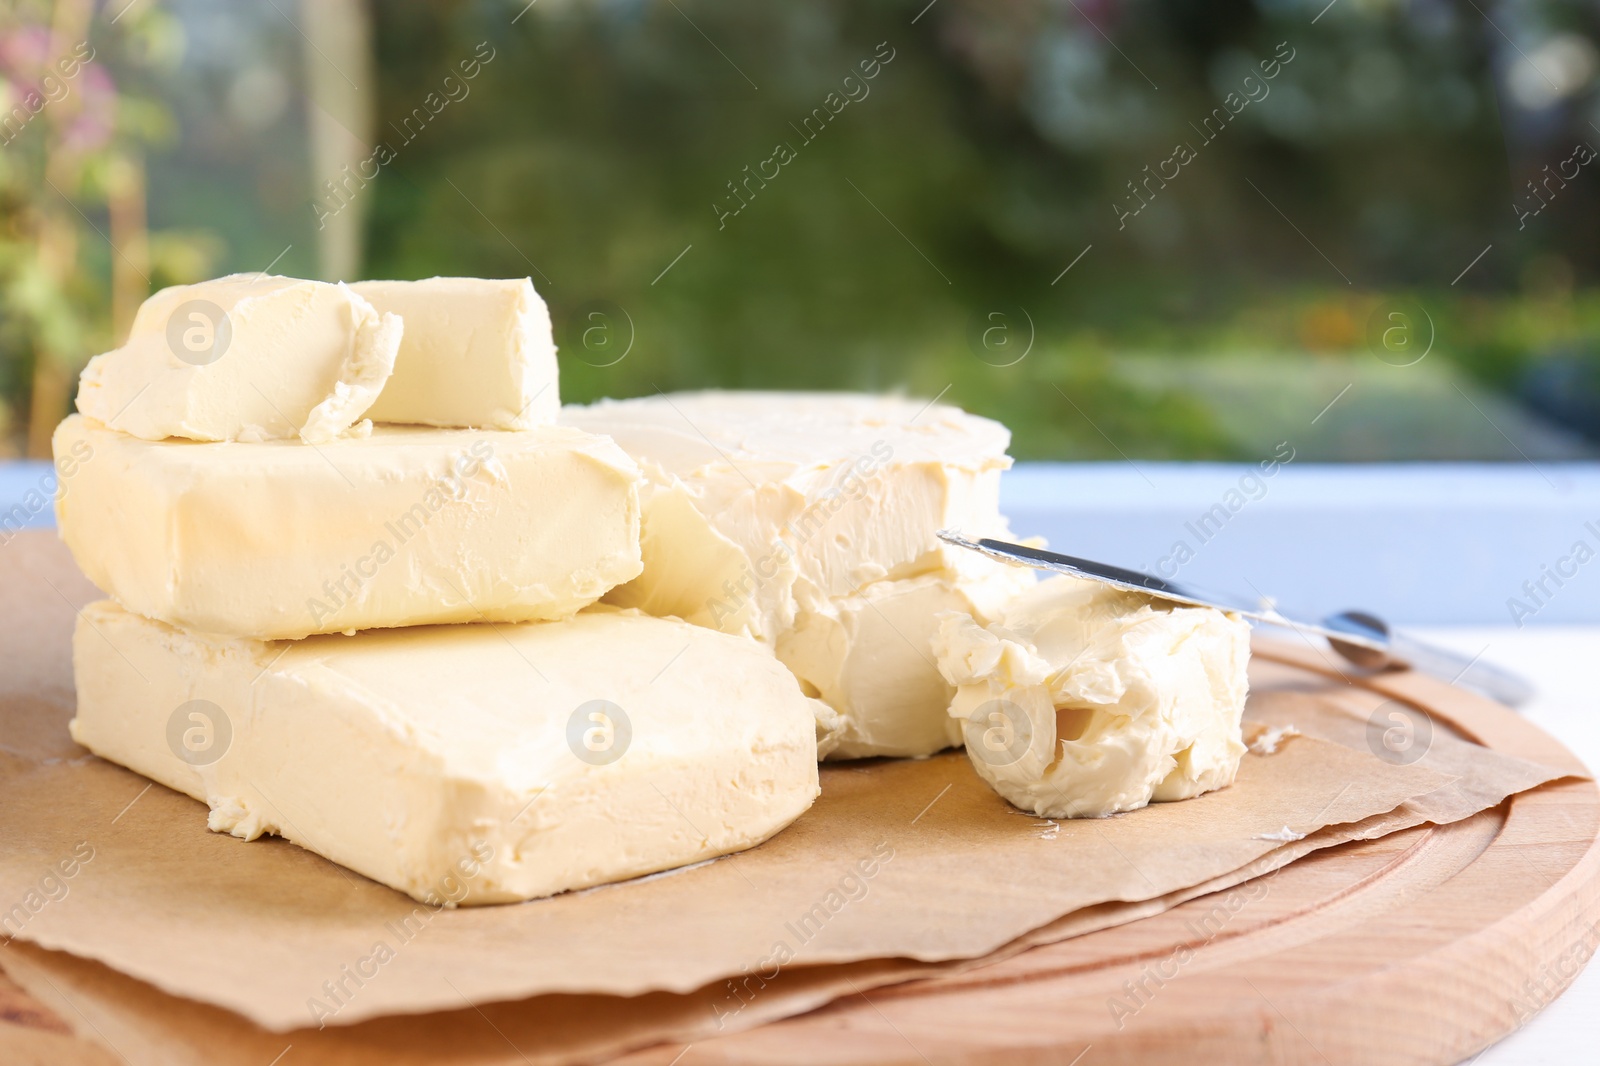 Photo of Tray with tasty homemade butter and knife on white wooden windowsill